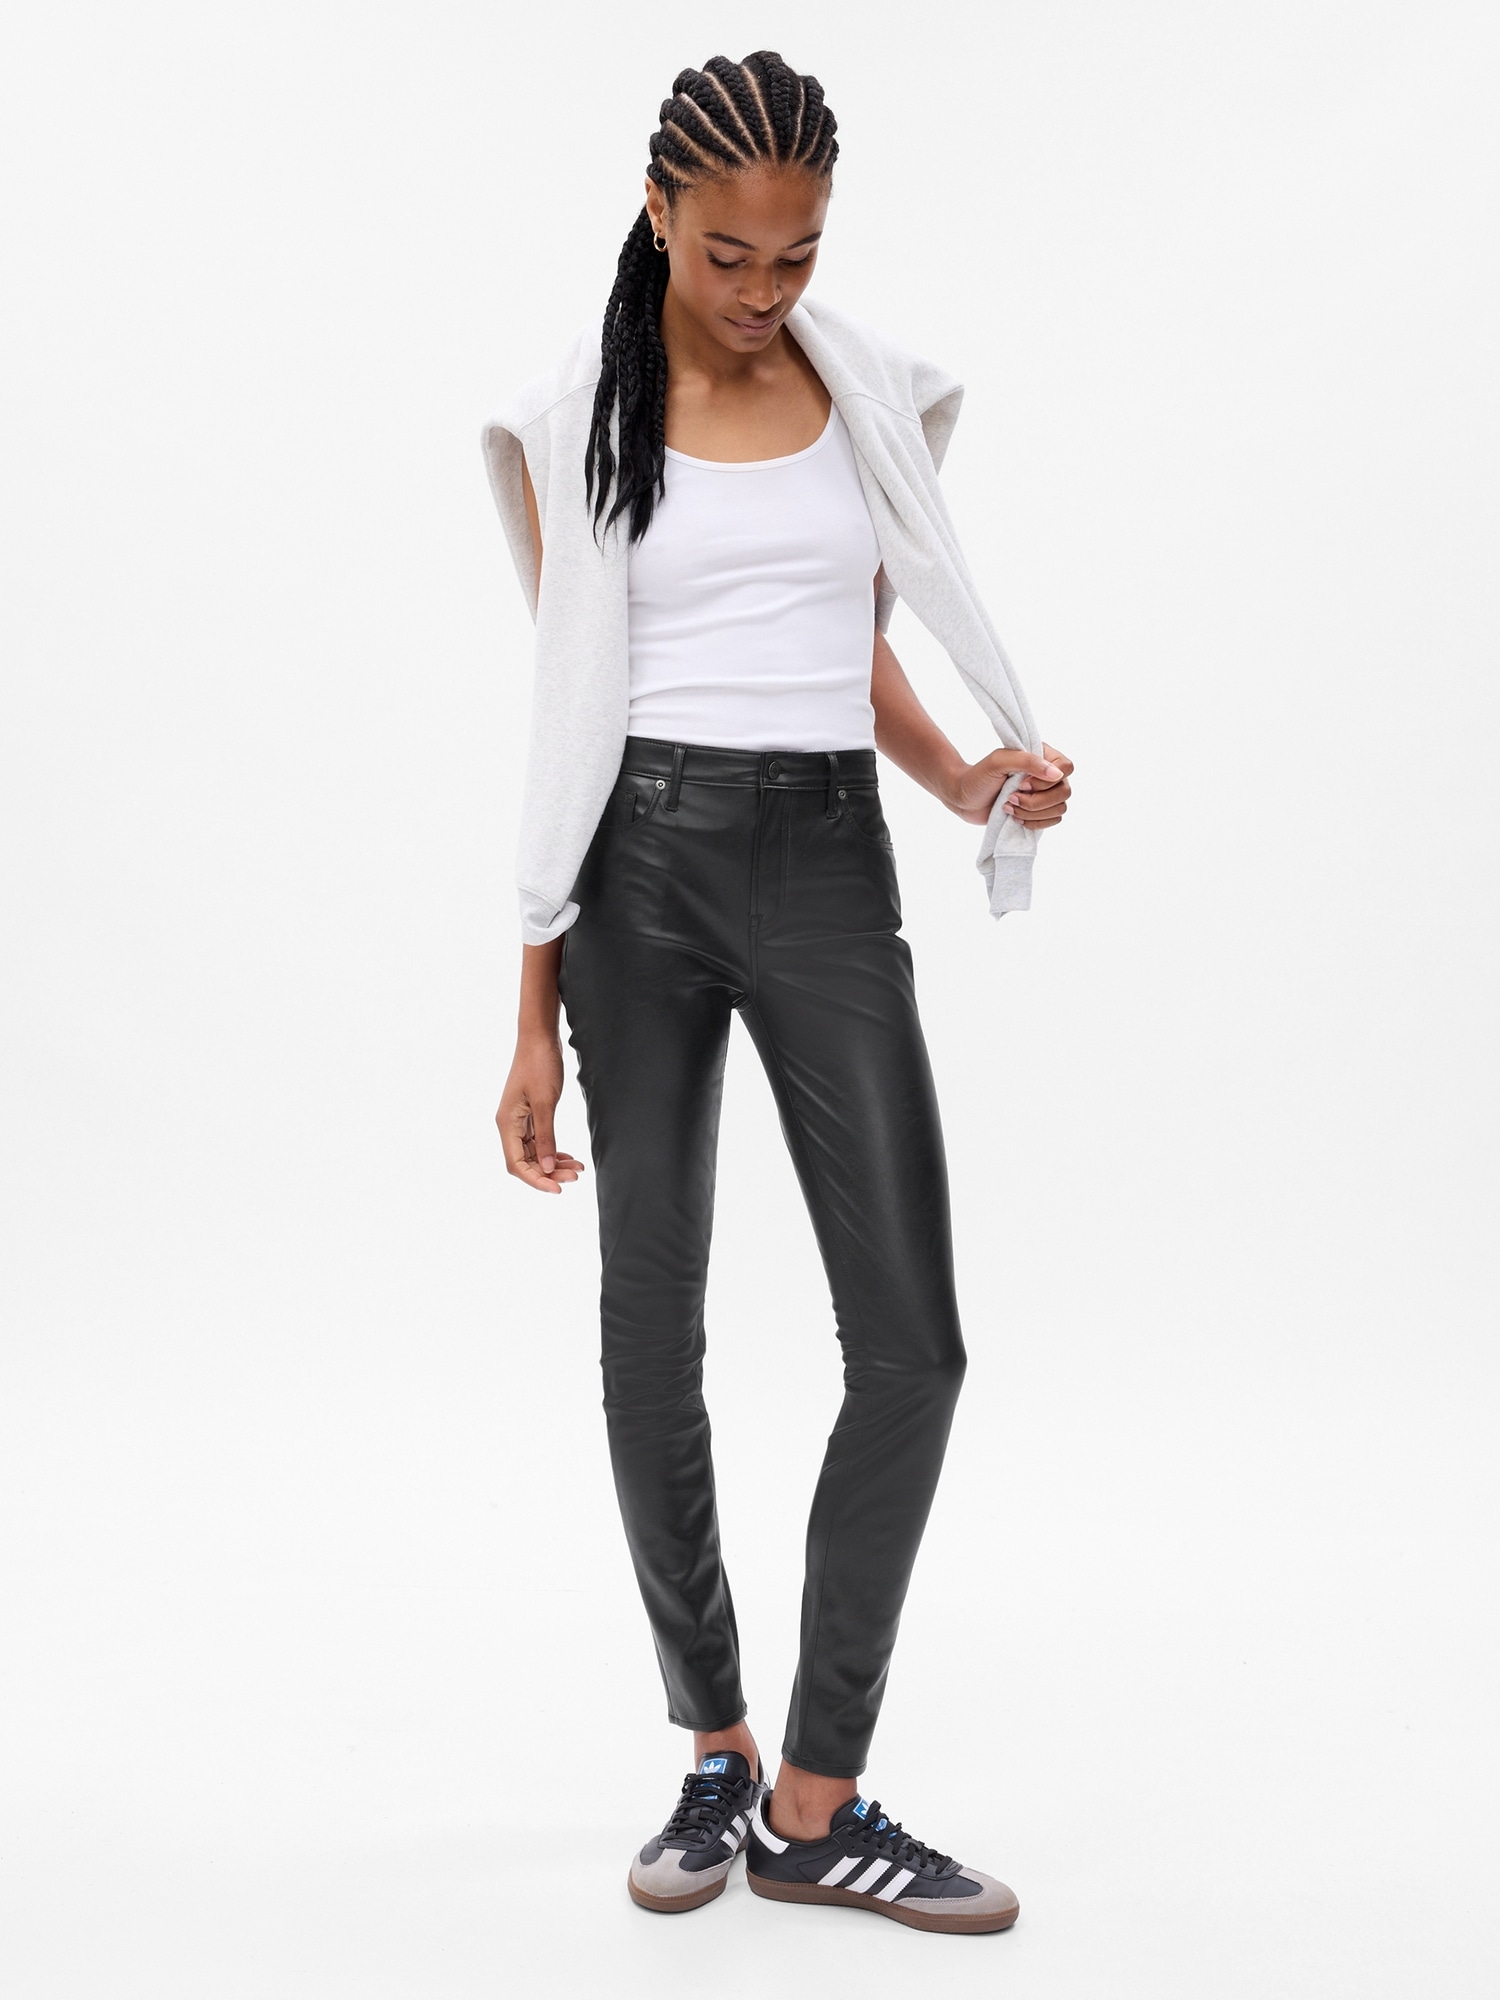 Women Real Leather Trousers Classic Skinny Pants Slim fit Leggings – KSK  LEATHER